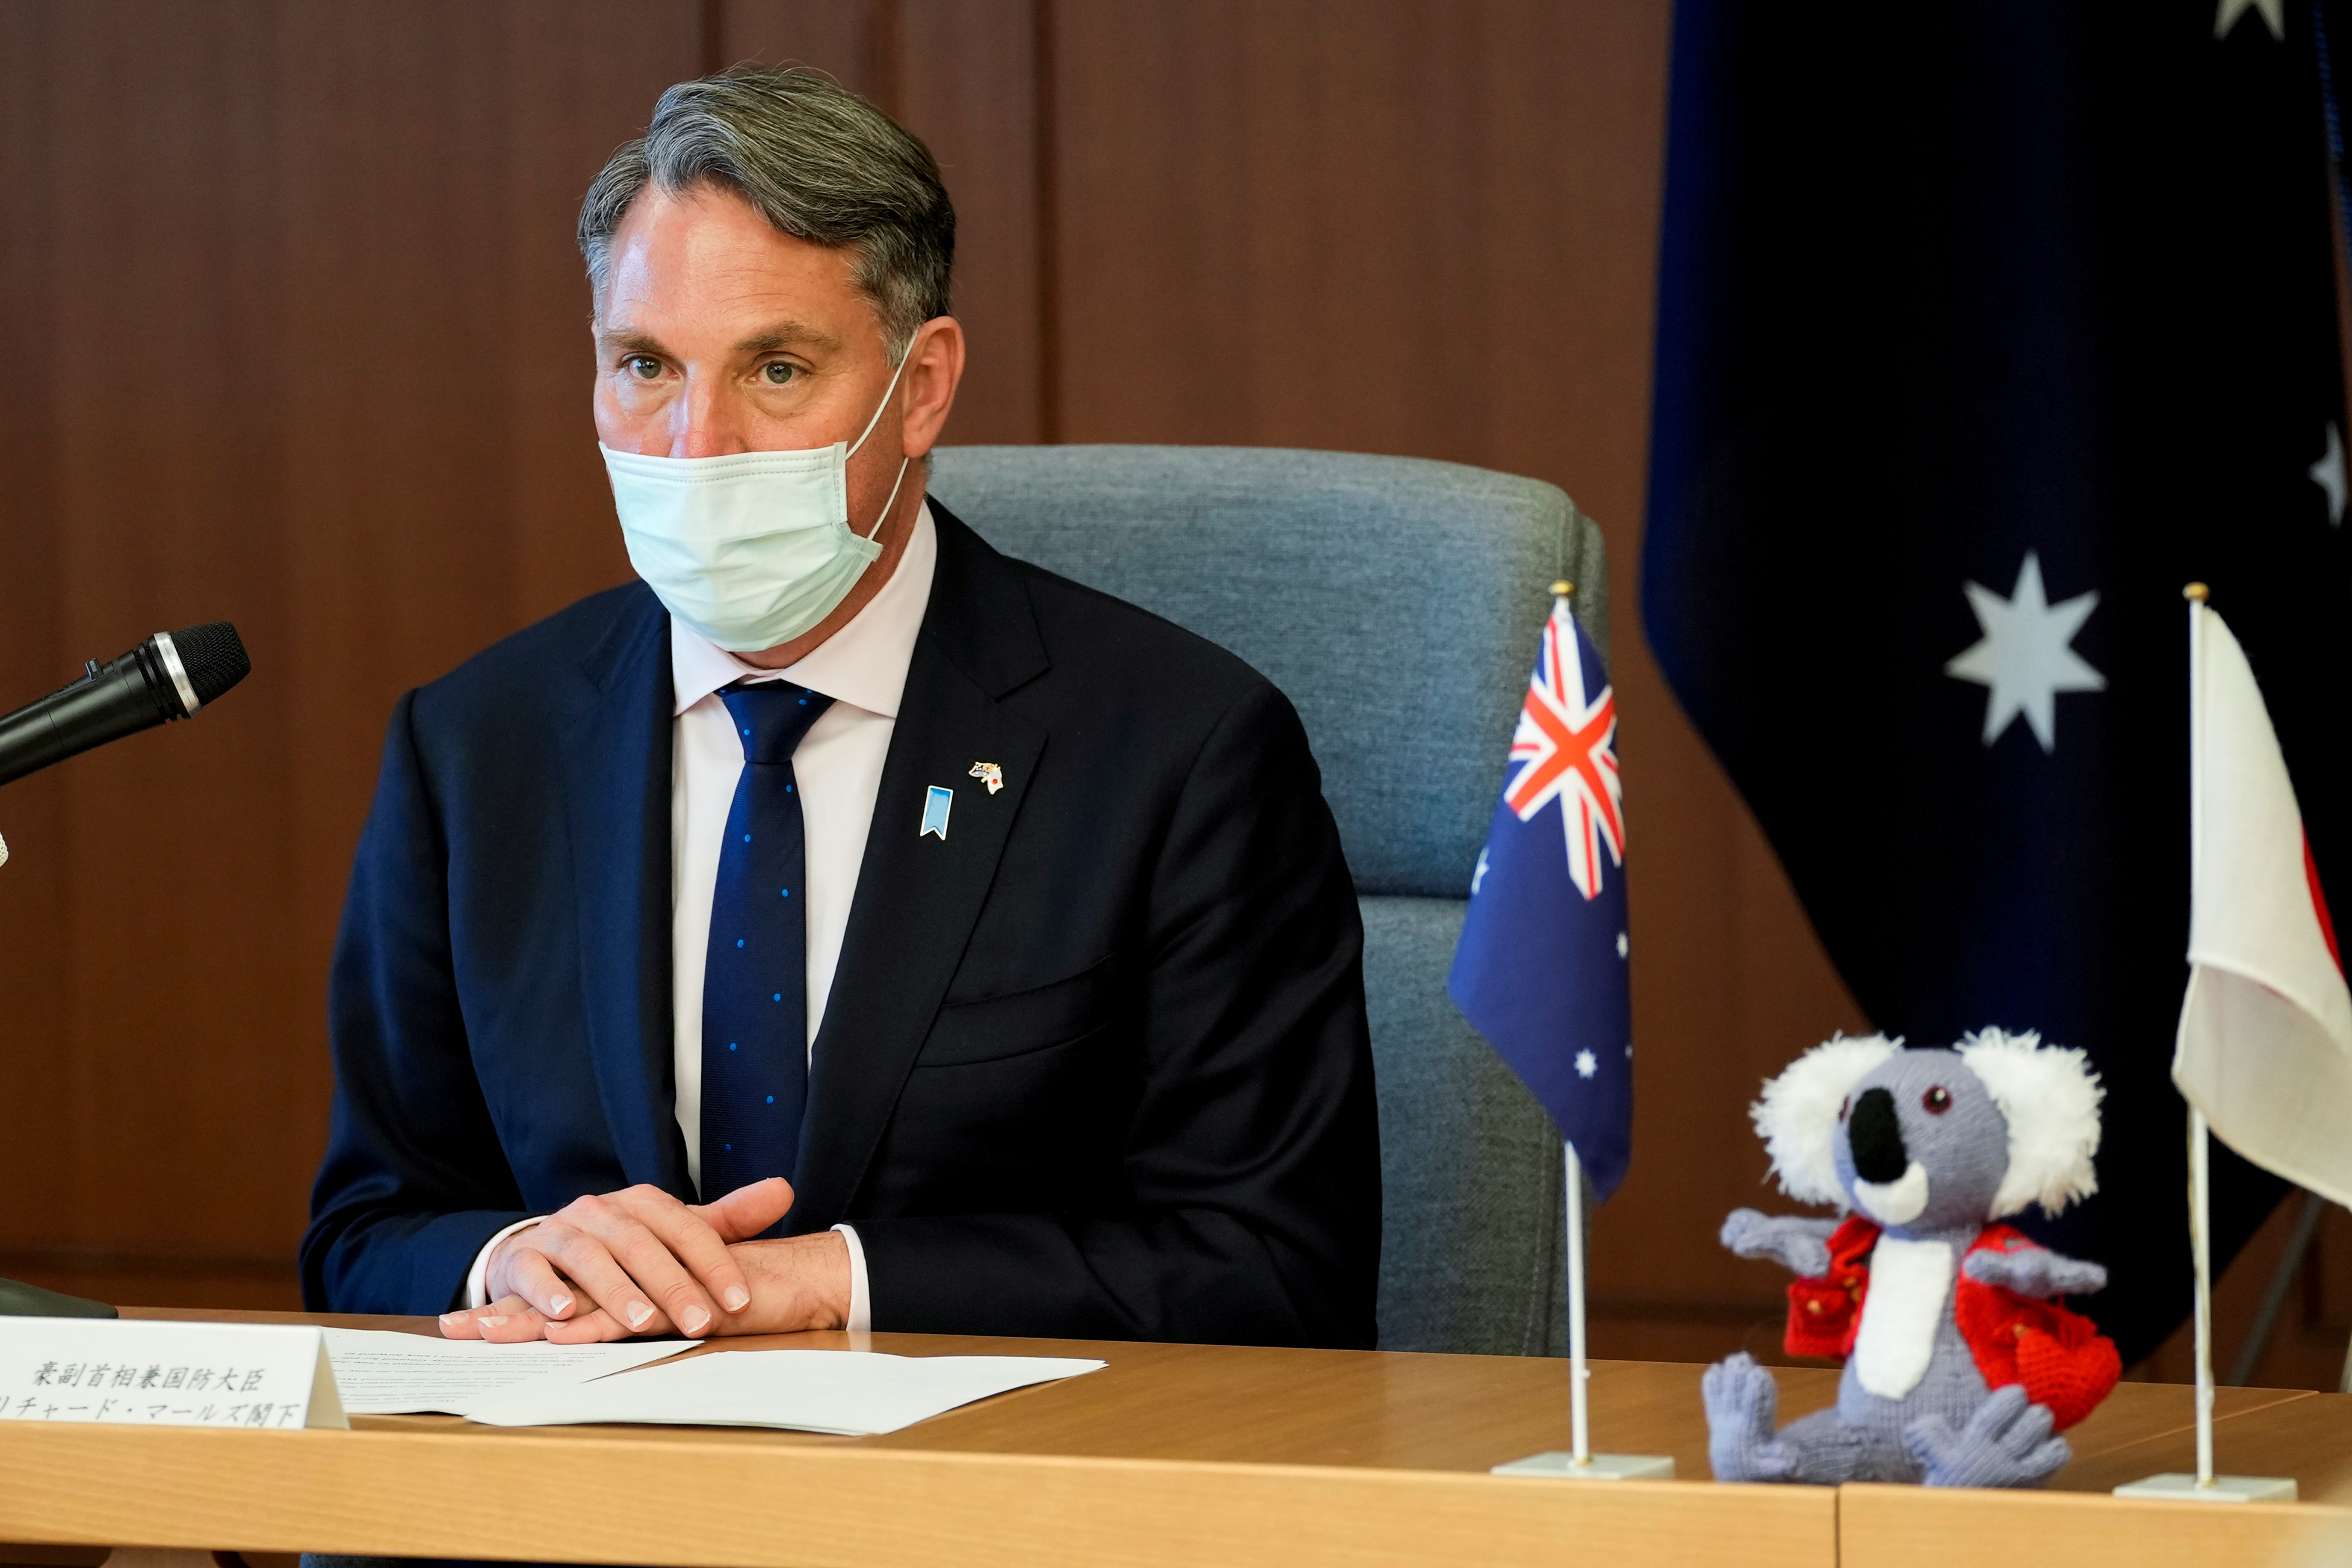 Australia's Defence Minister Marles meets his Japanese counterpart in Tokyo